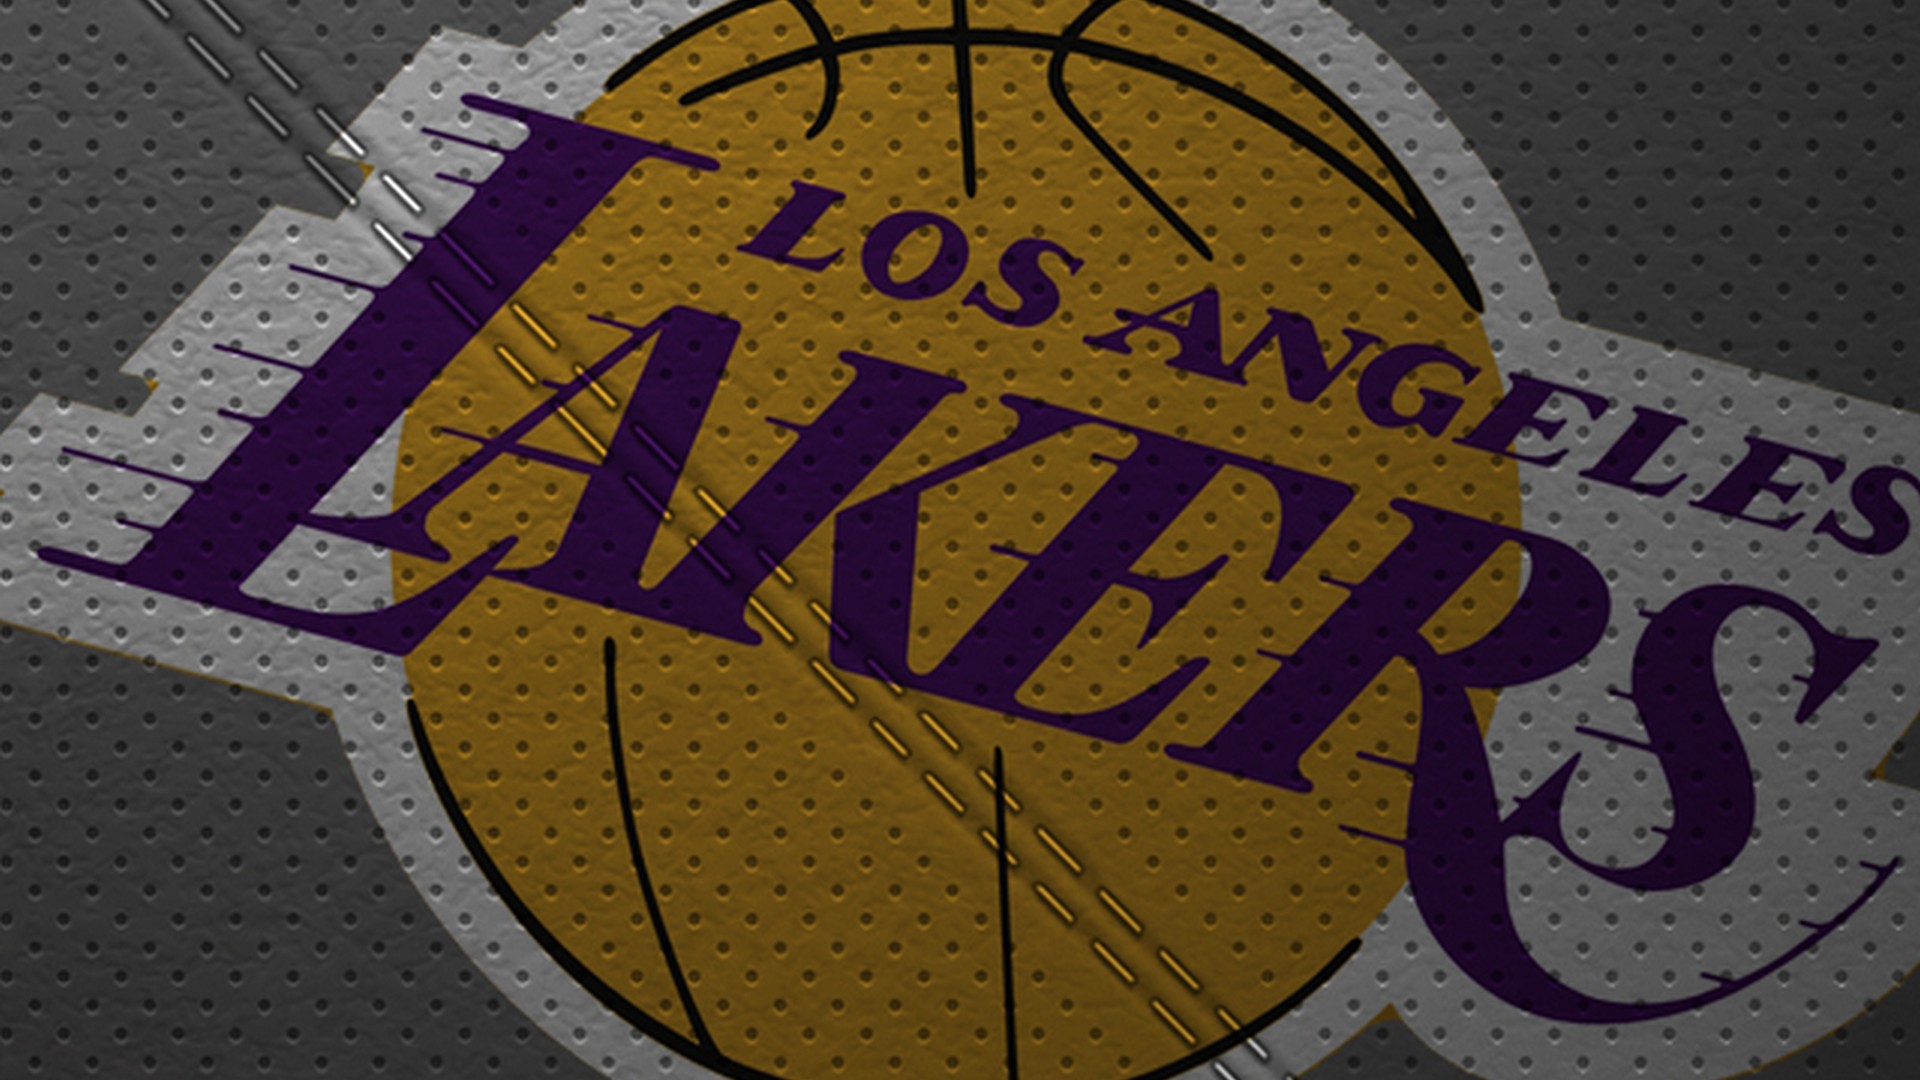 HD LA Lakers Wallpapers with image dimensions 1920x1080 pixel. You can make this wallpaper for your Desktop Computer Backgrounds, Windows or Mac Screensavers, iPhone Lock screen, Tablet or Android and another Mobile Phone device